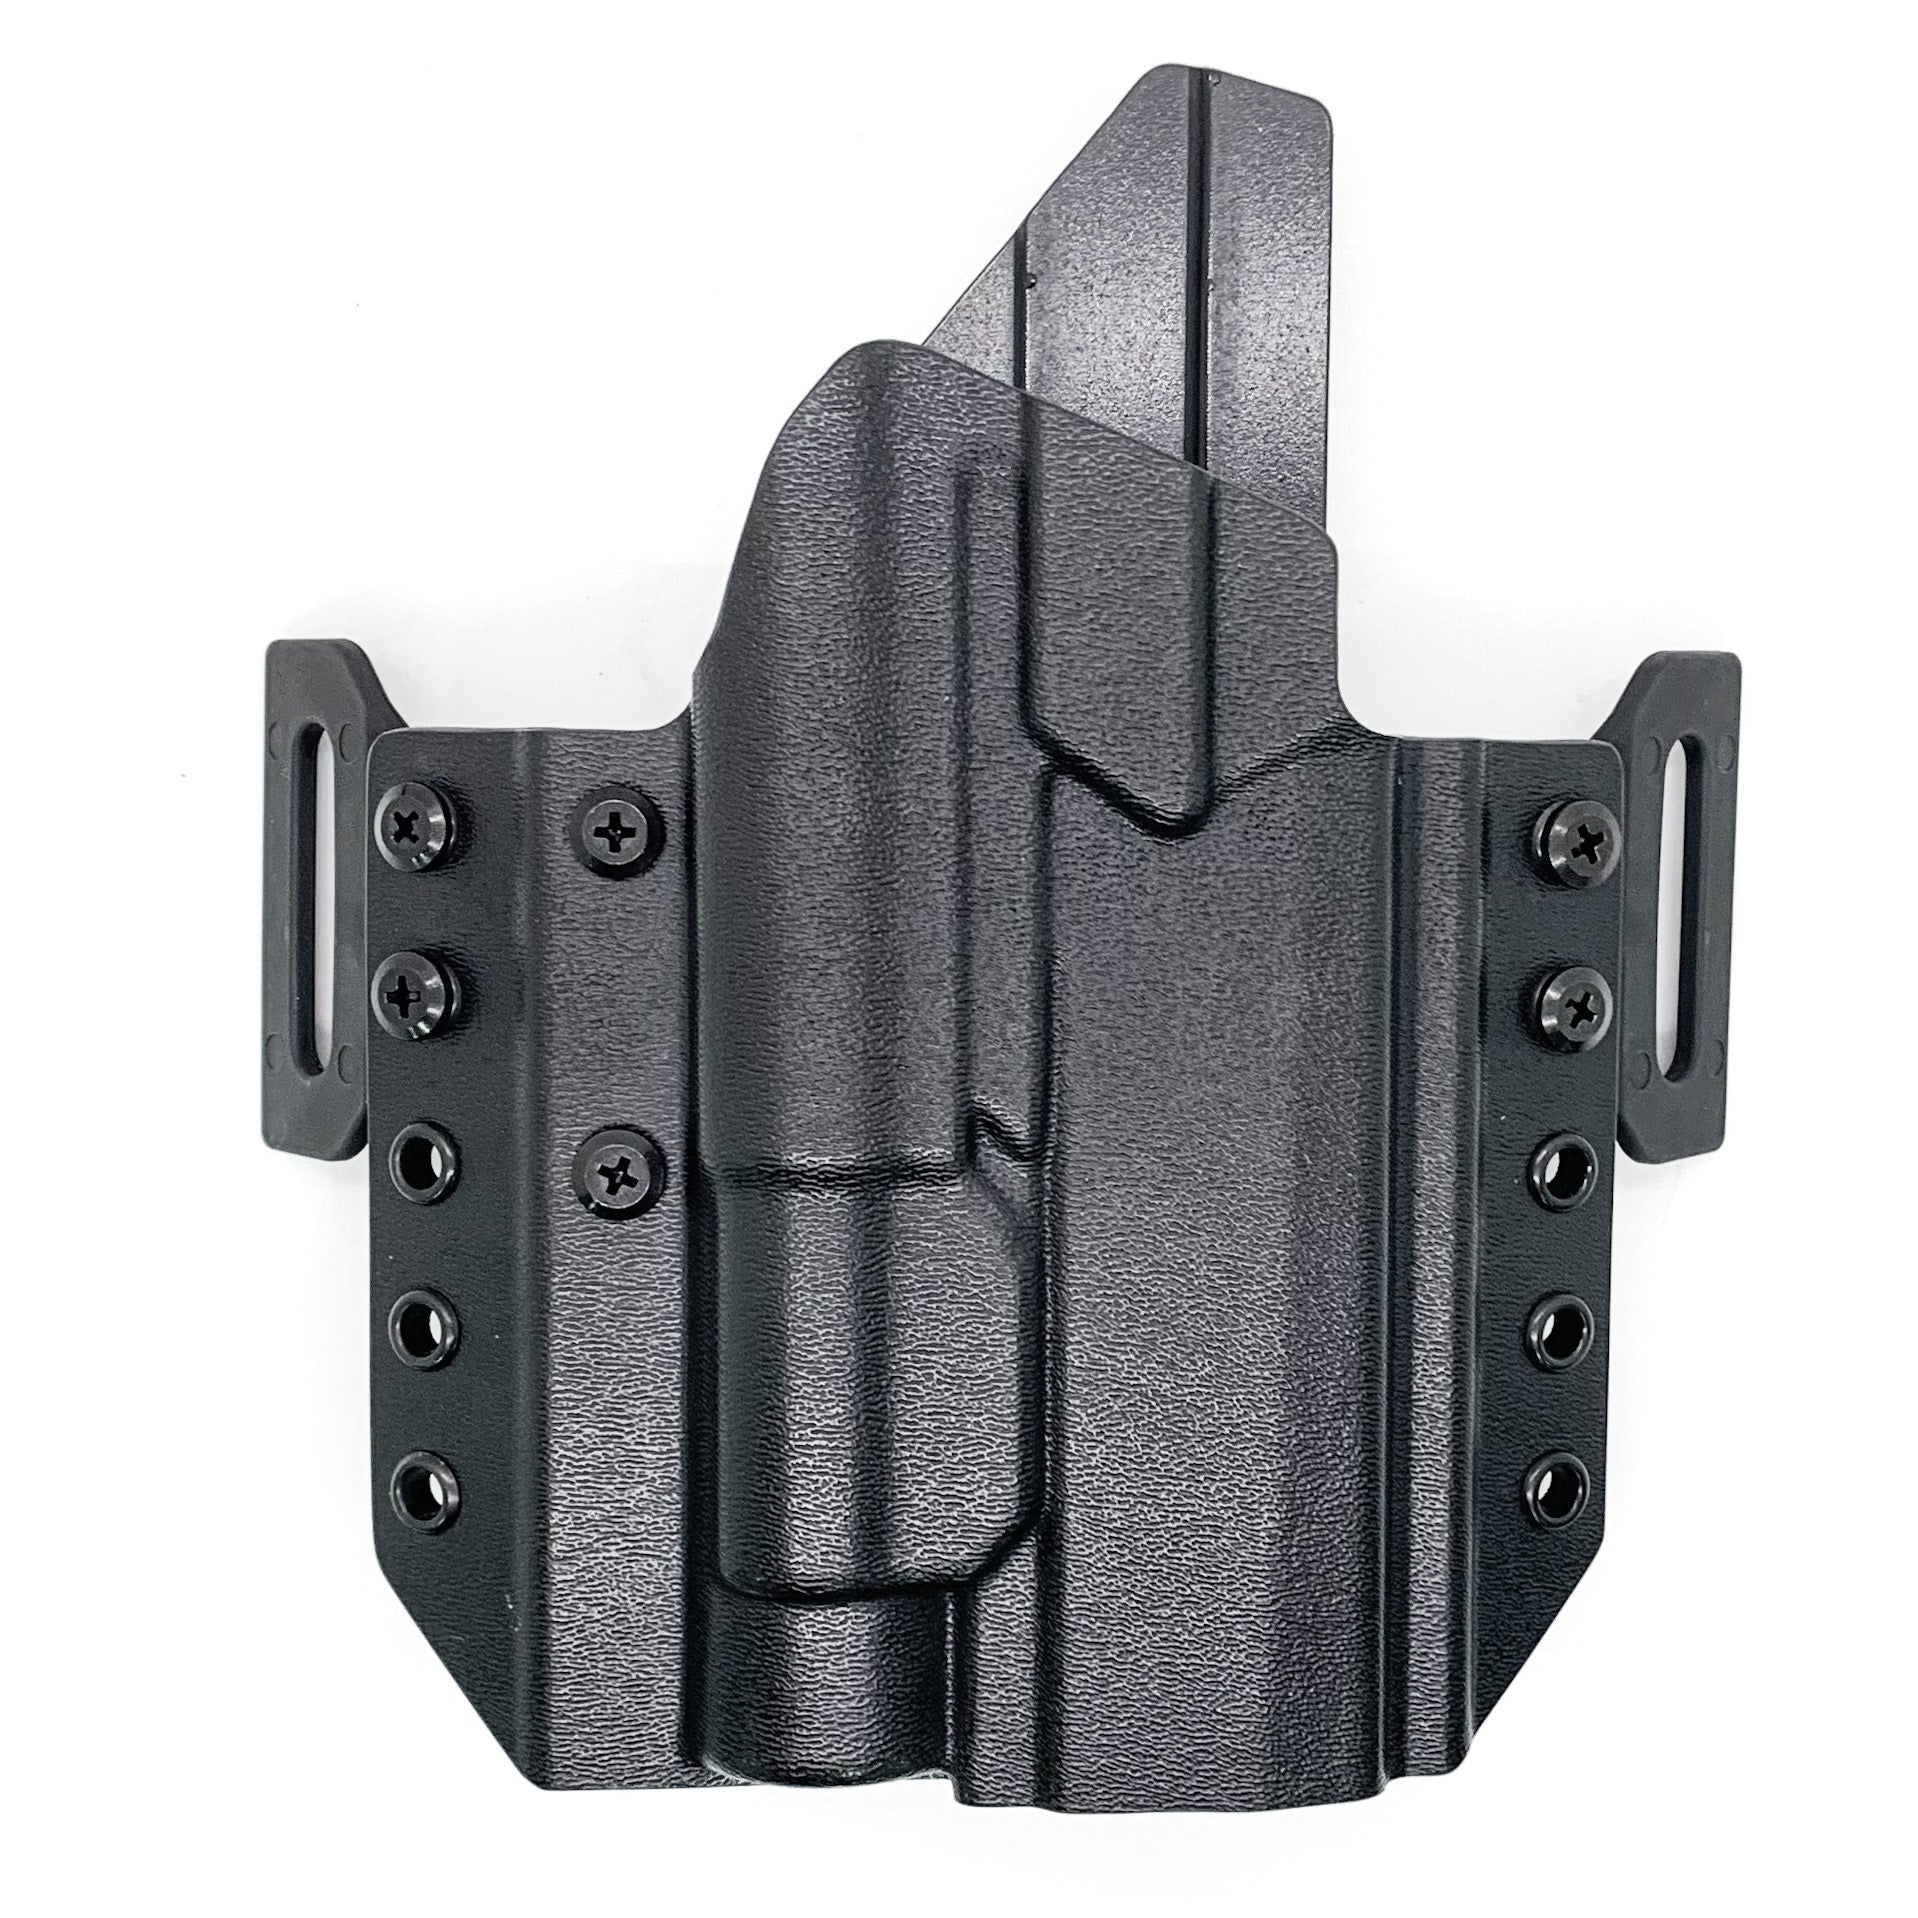 For the best OWB Outside Waistband Pancake Style holster for the Sig Sauer P320 with the Streamlight TLR-1 HL, shop Four Brothers Holsters.  Adjustable cant, cleared for red dot sights and enclosed emitter optics. Short, fast shipping with 24-hour lead times.